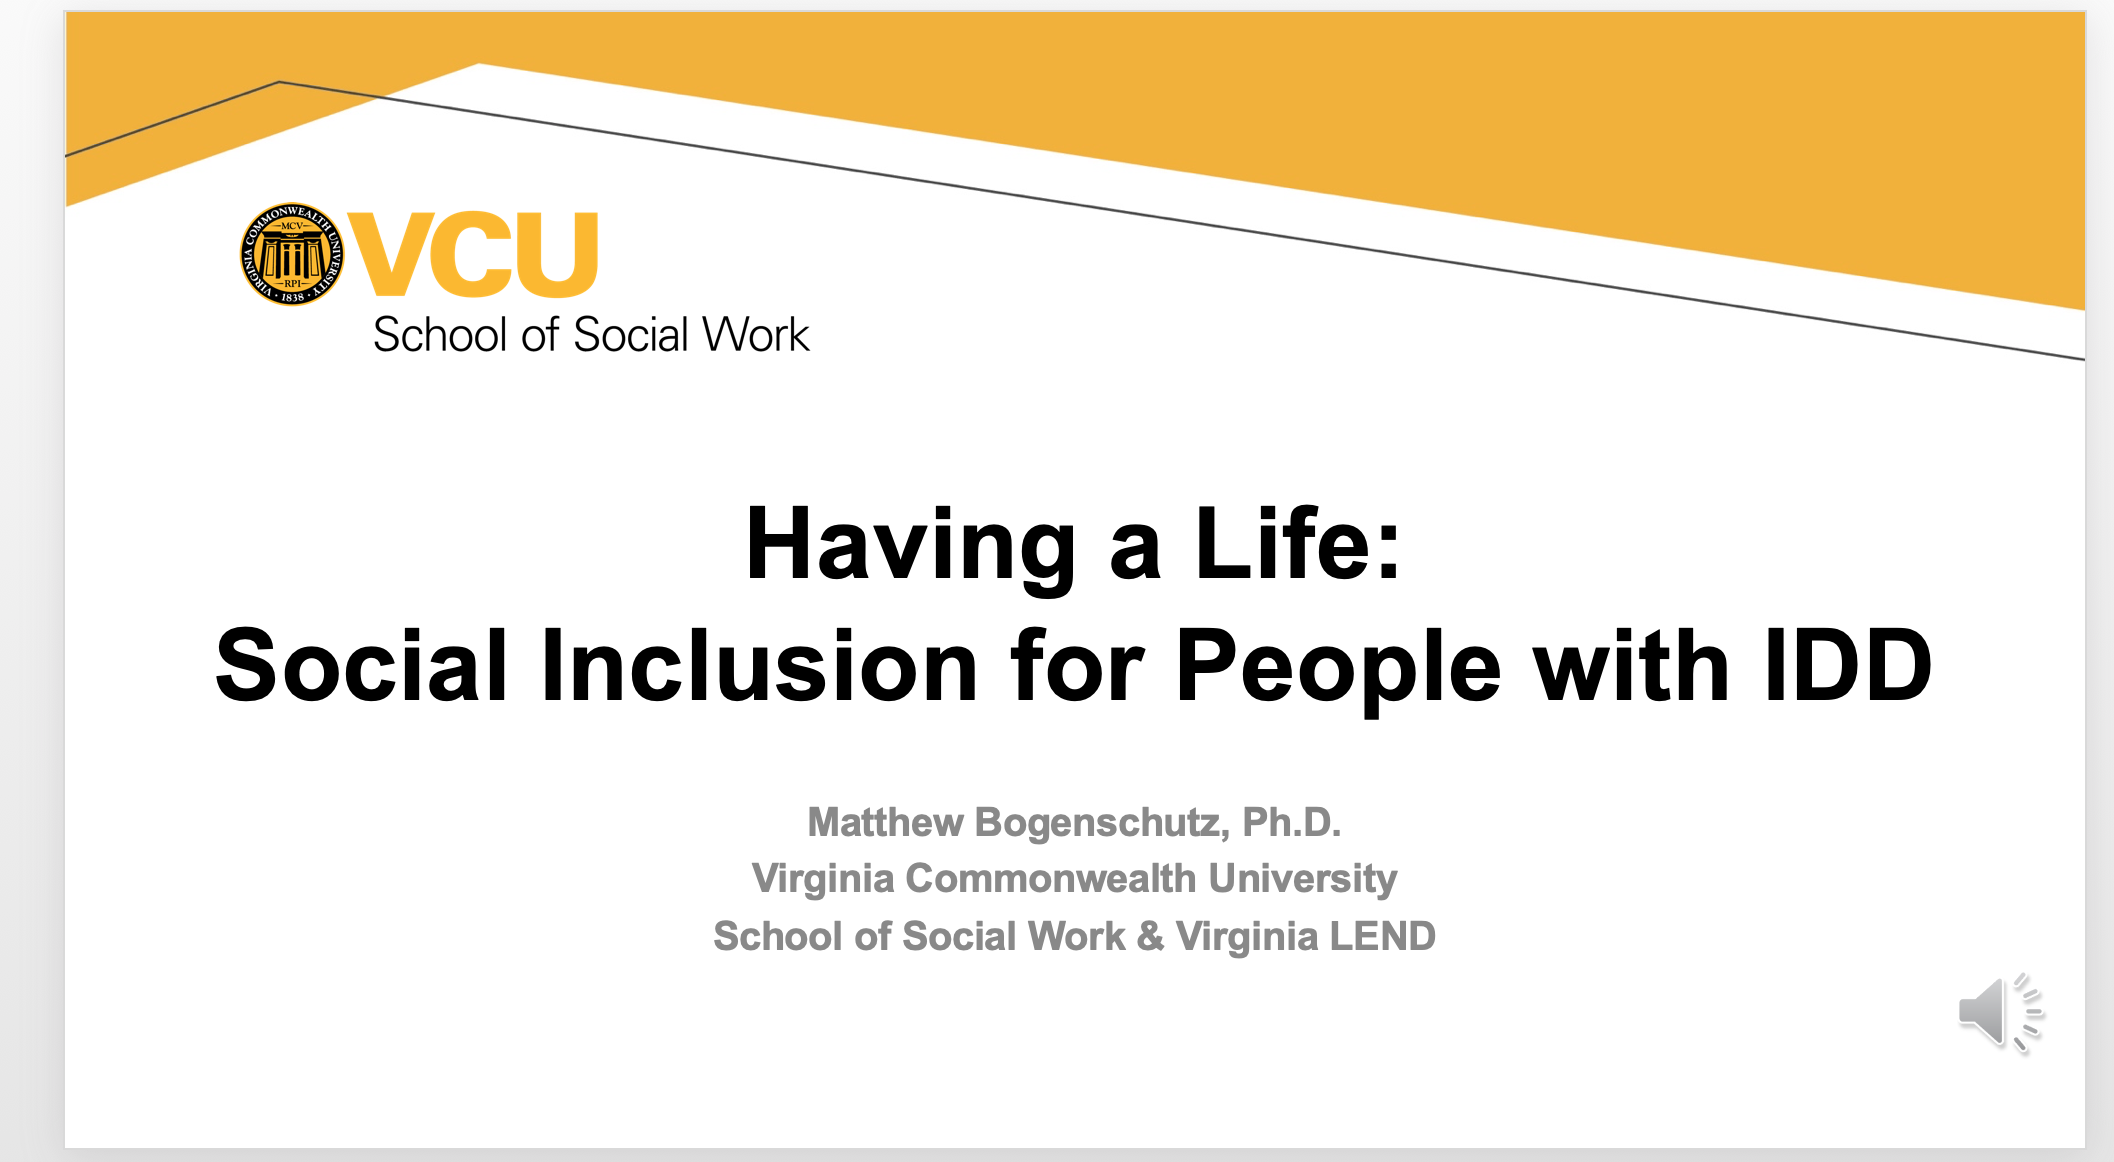 Having A Life Social Inclusion for People with IDD VCU white and gold banner